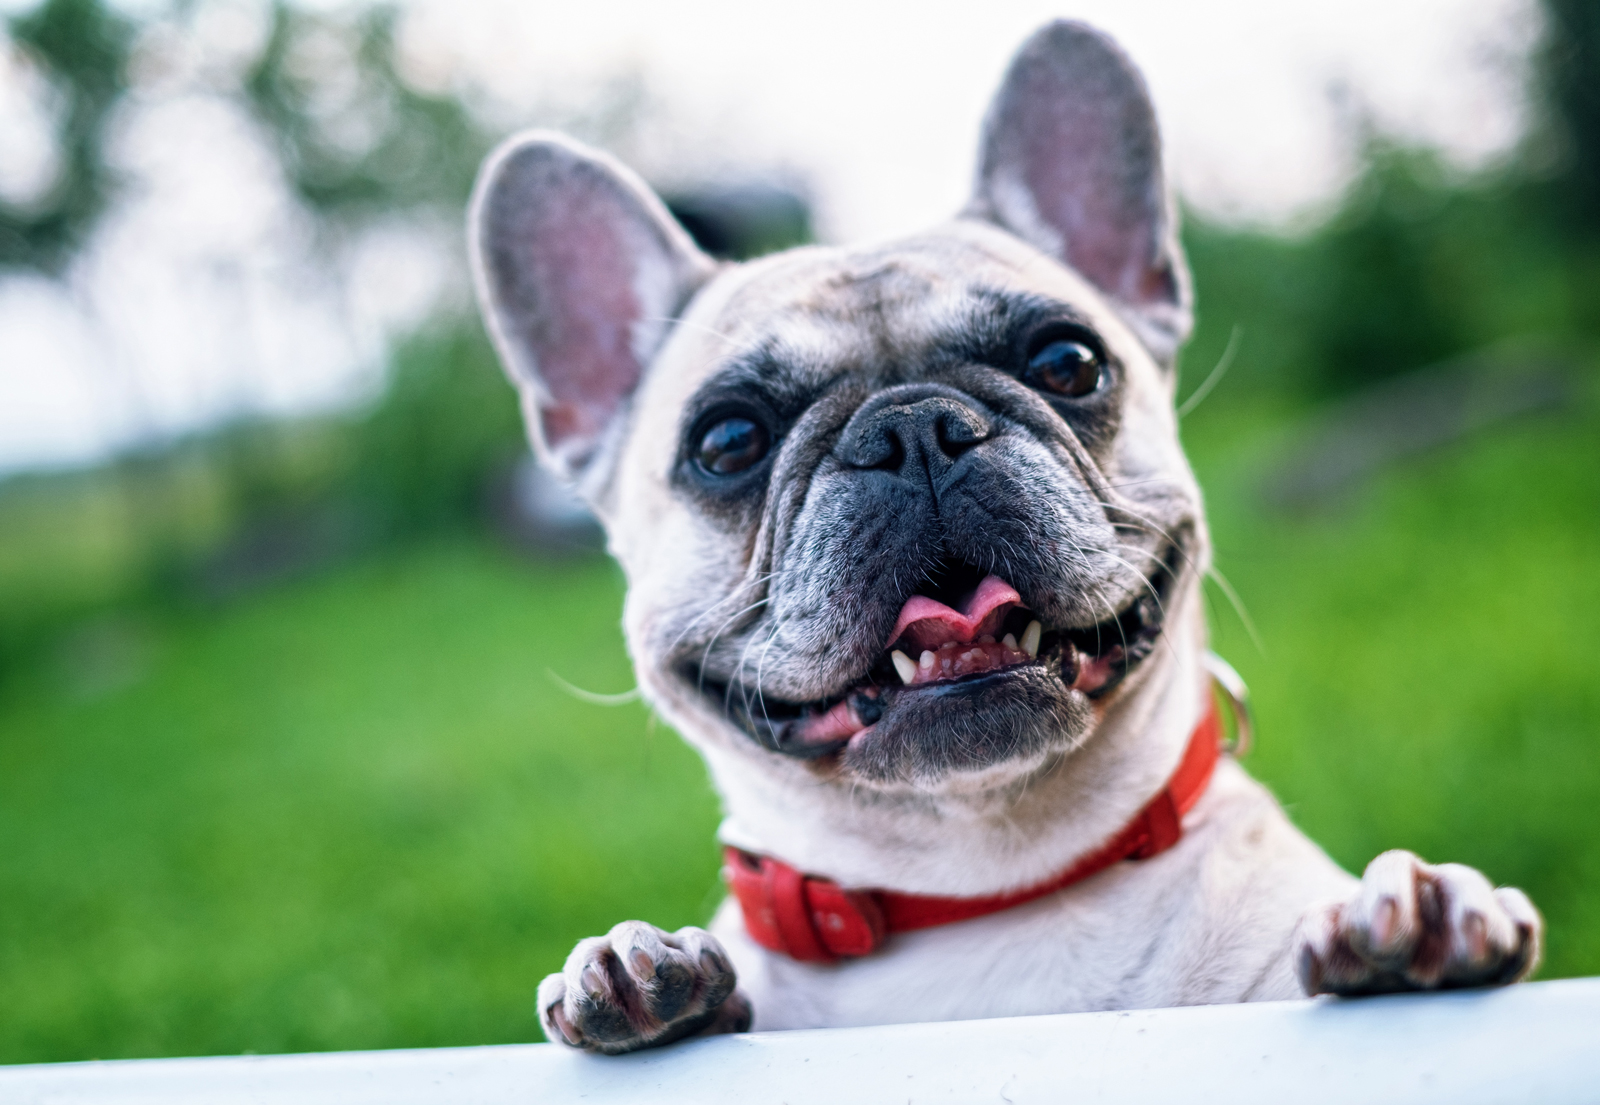 A french bulldog with its front legs up on a ledge panting